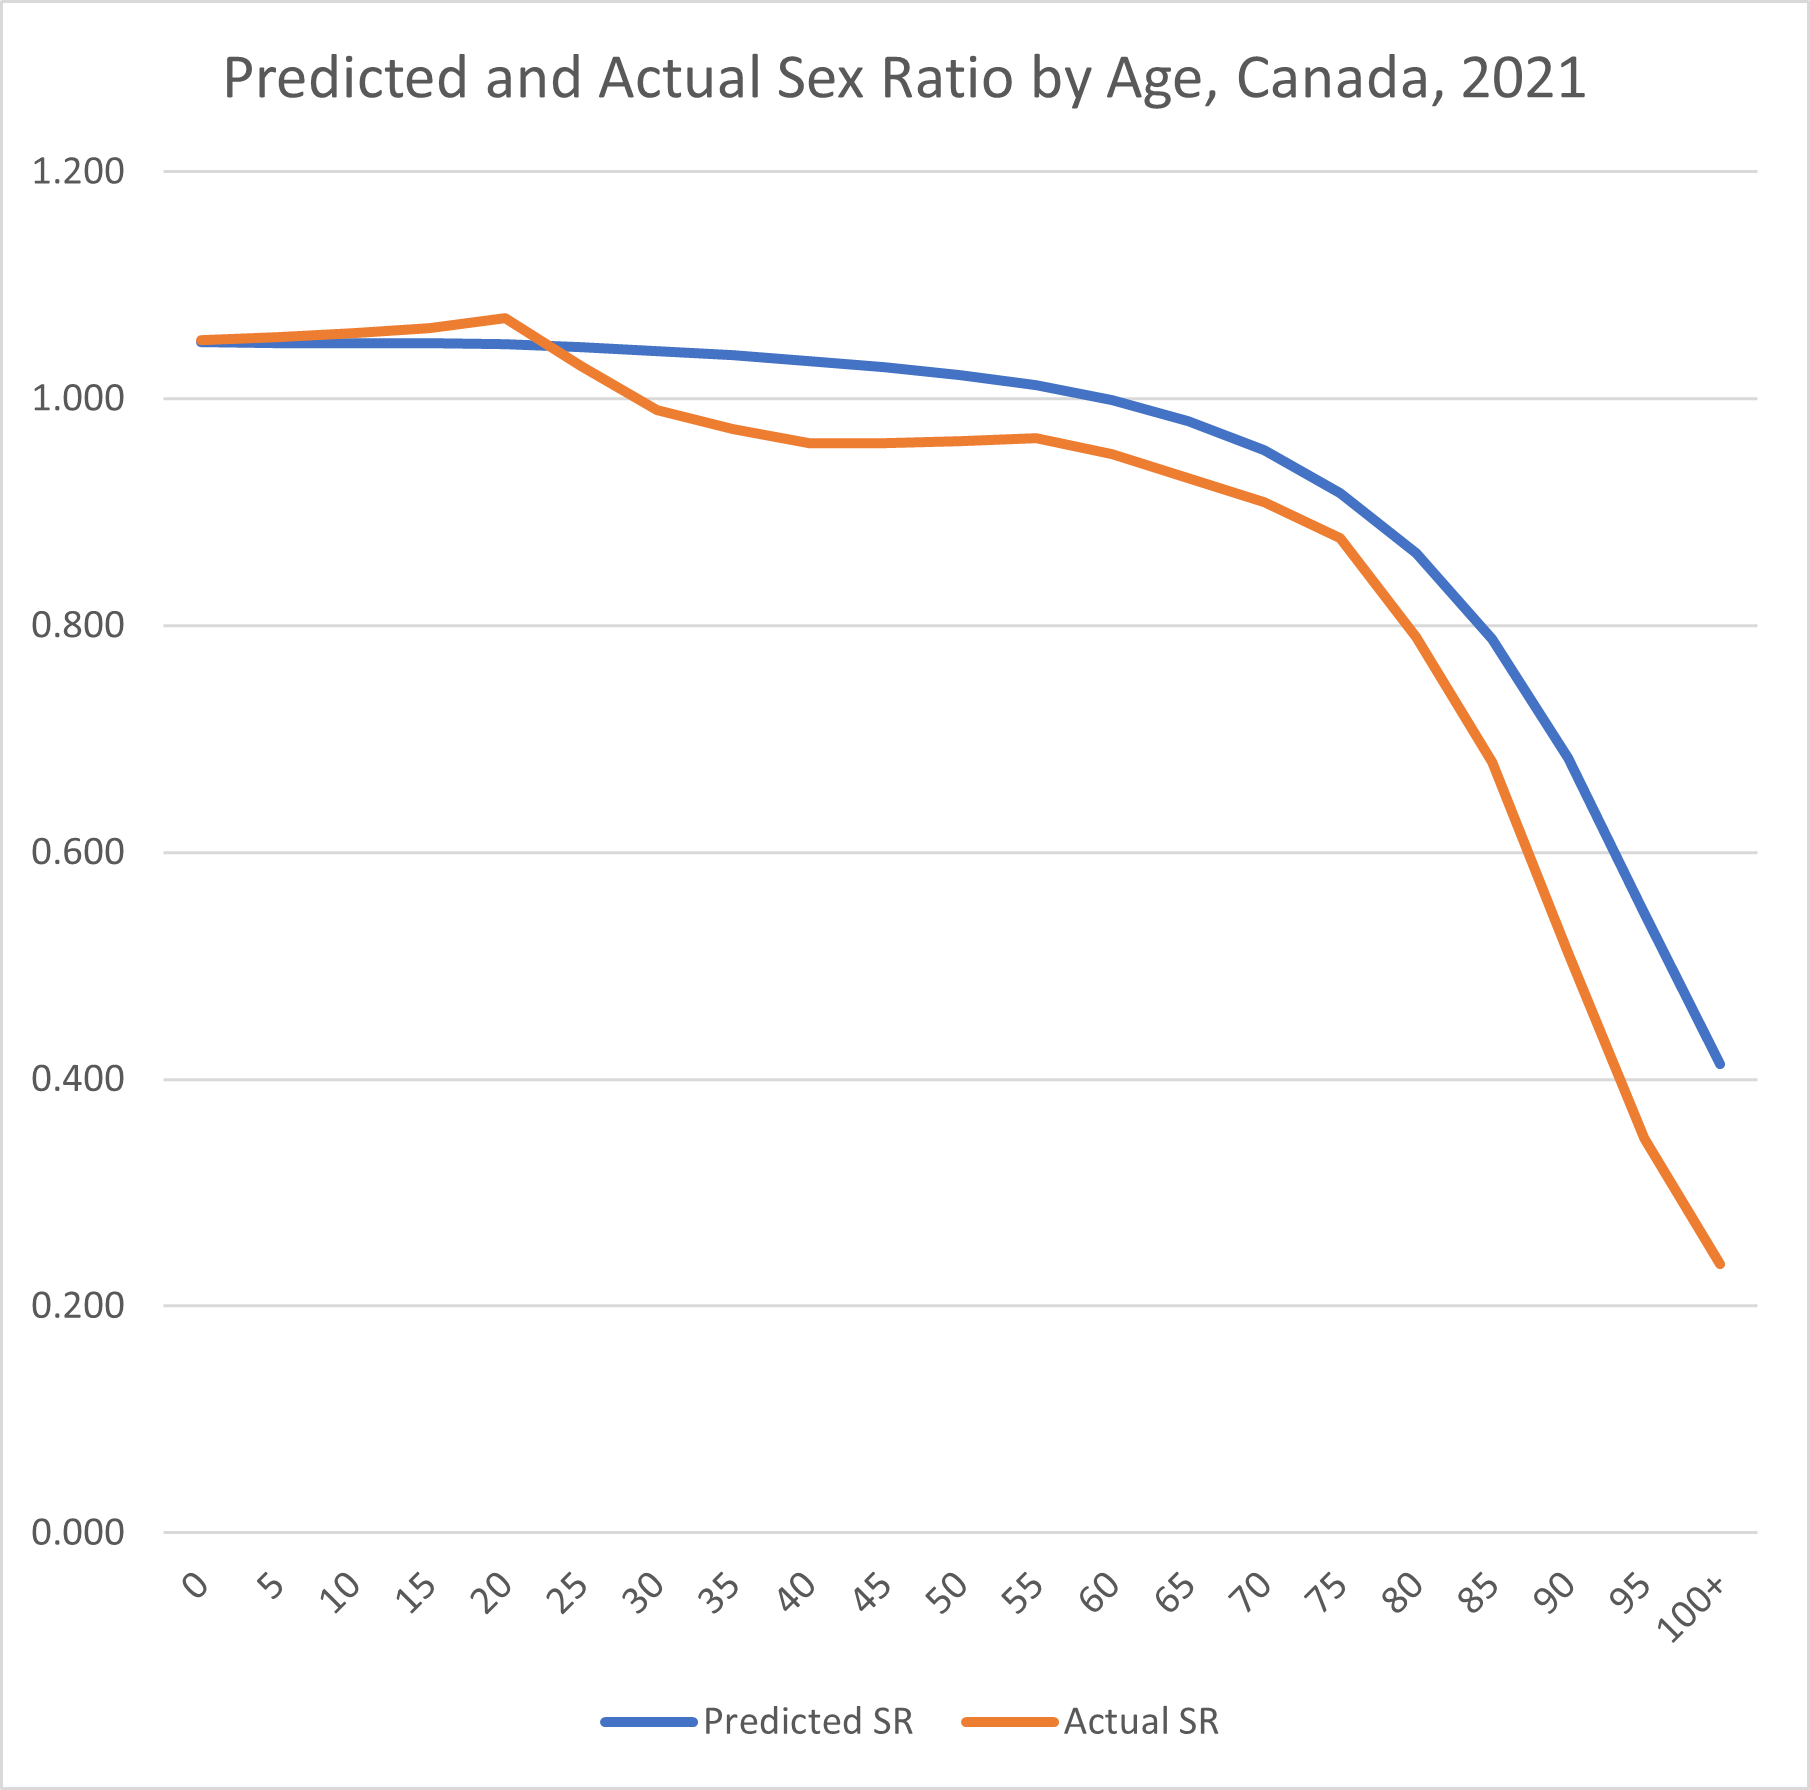 This graph shows the actual sex ratio by age for 2021, which begins at 1.05 males per female at birth, blips up for older teens, then drops markedly. It plateaus in middle age before sinking after age 75. The predicted sex ratio falls smoothly down in an arc which is convex to the origin. Before age 25 it is below the actual sex ratio, but after that point it is above the actual sex ratio. The gap between the two is widest at around age 40.